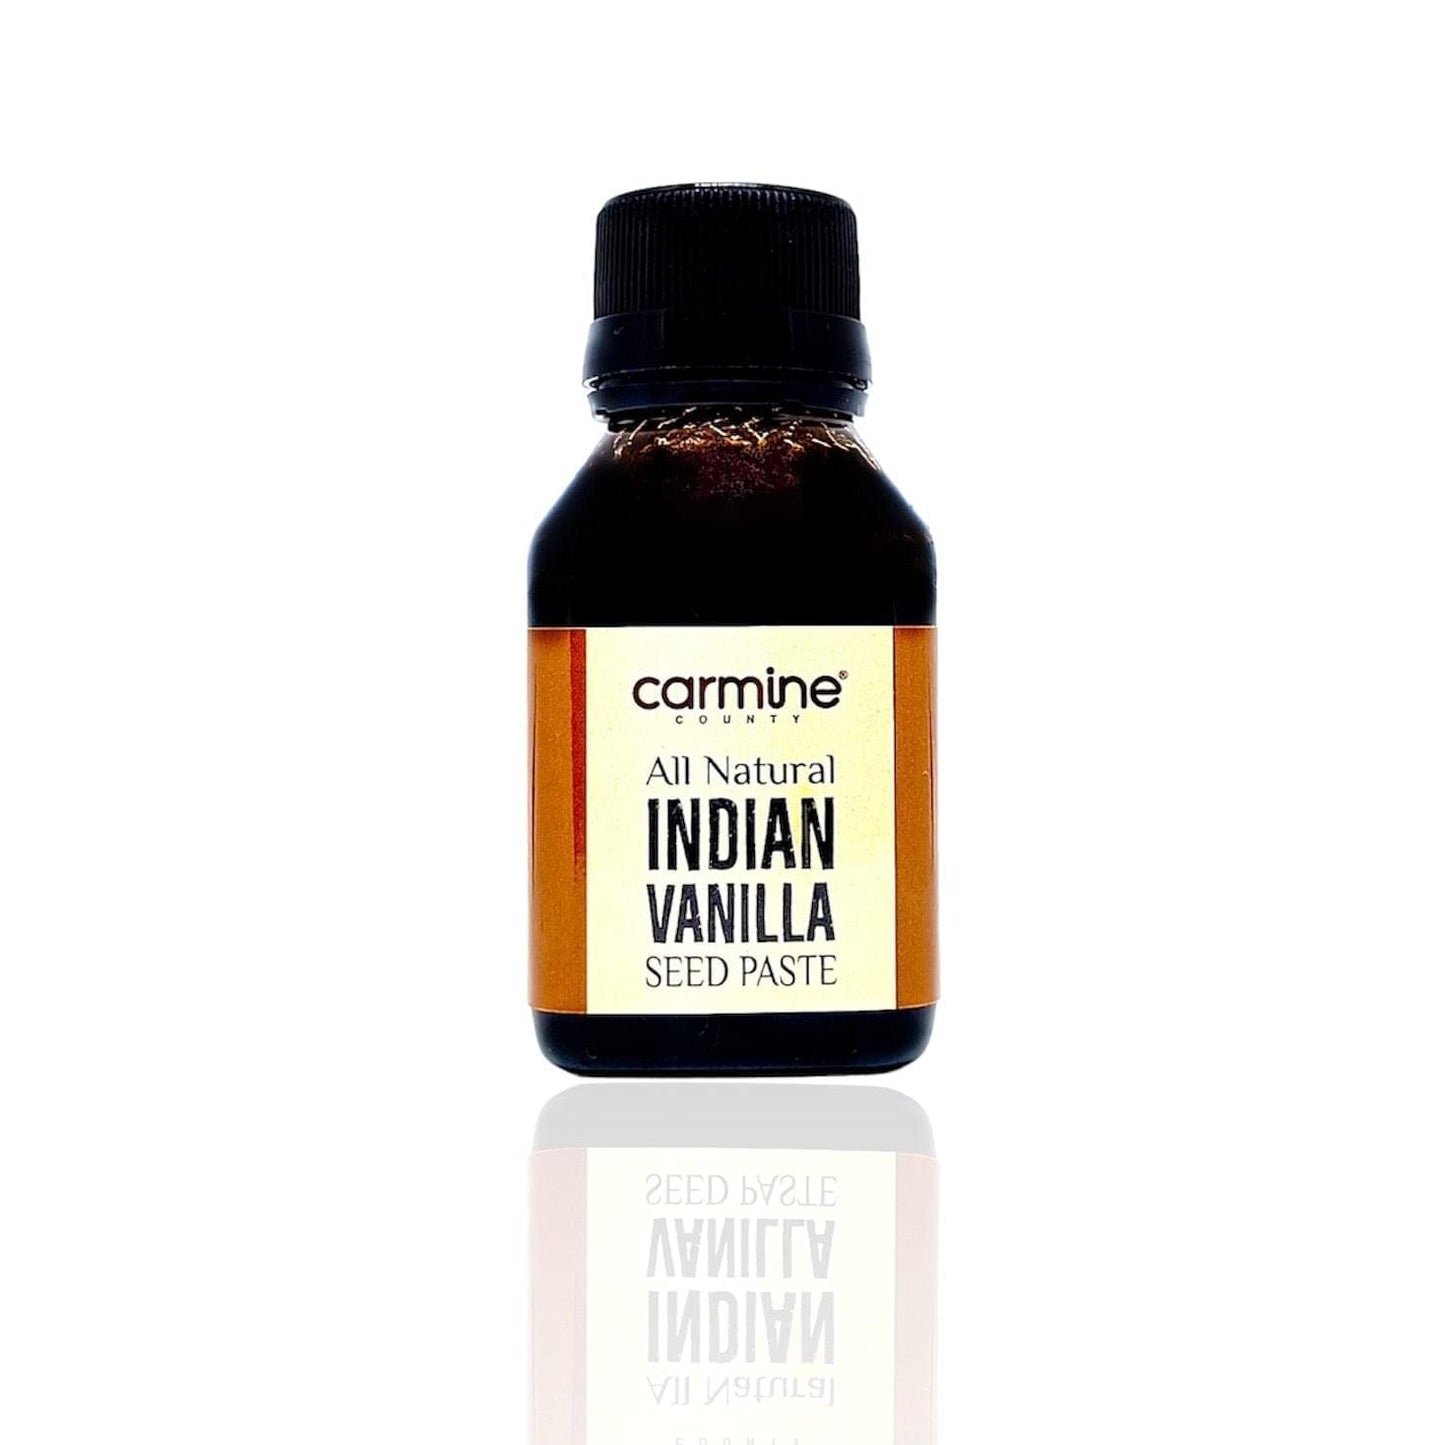 Carmine County All Natural Indian Vanilla Seed Paste with a pack of free Vanilla Extract